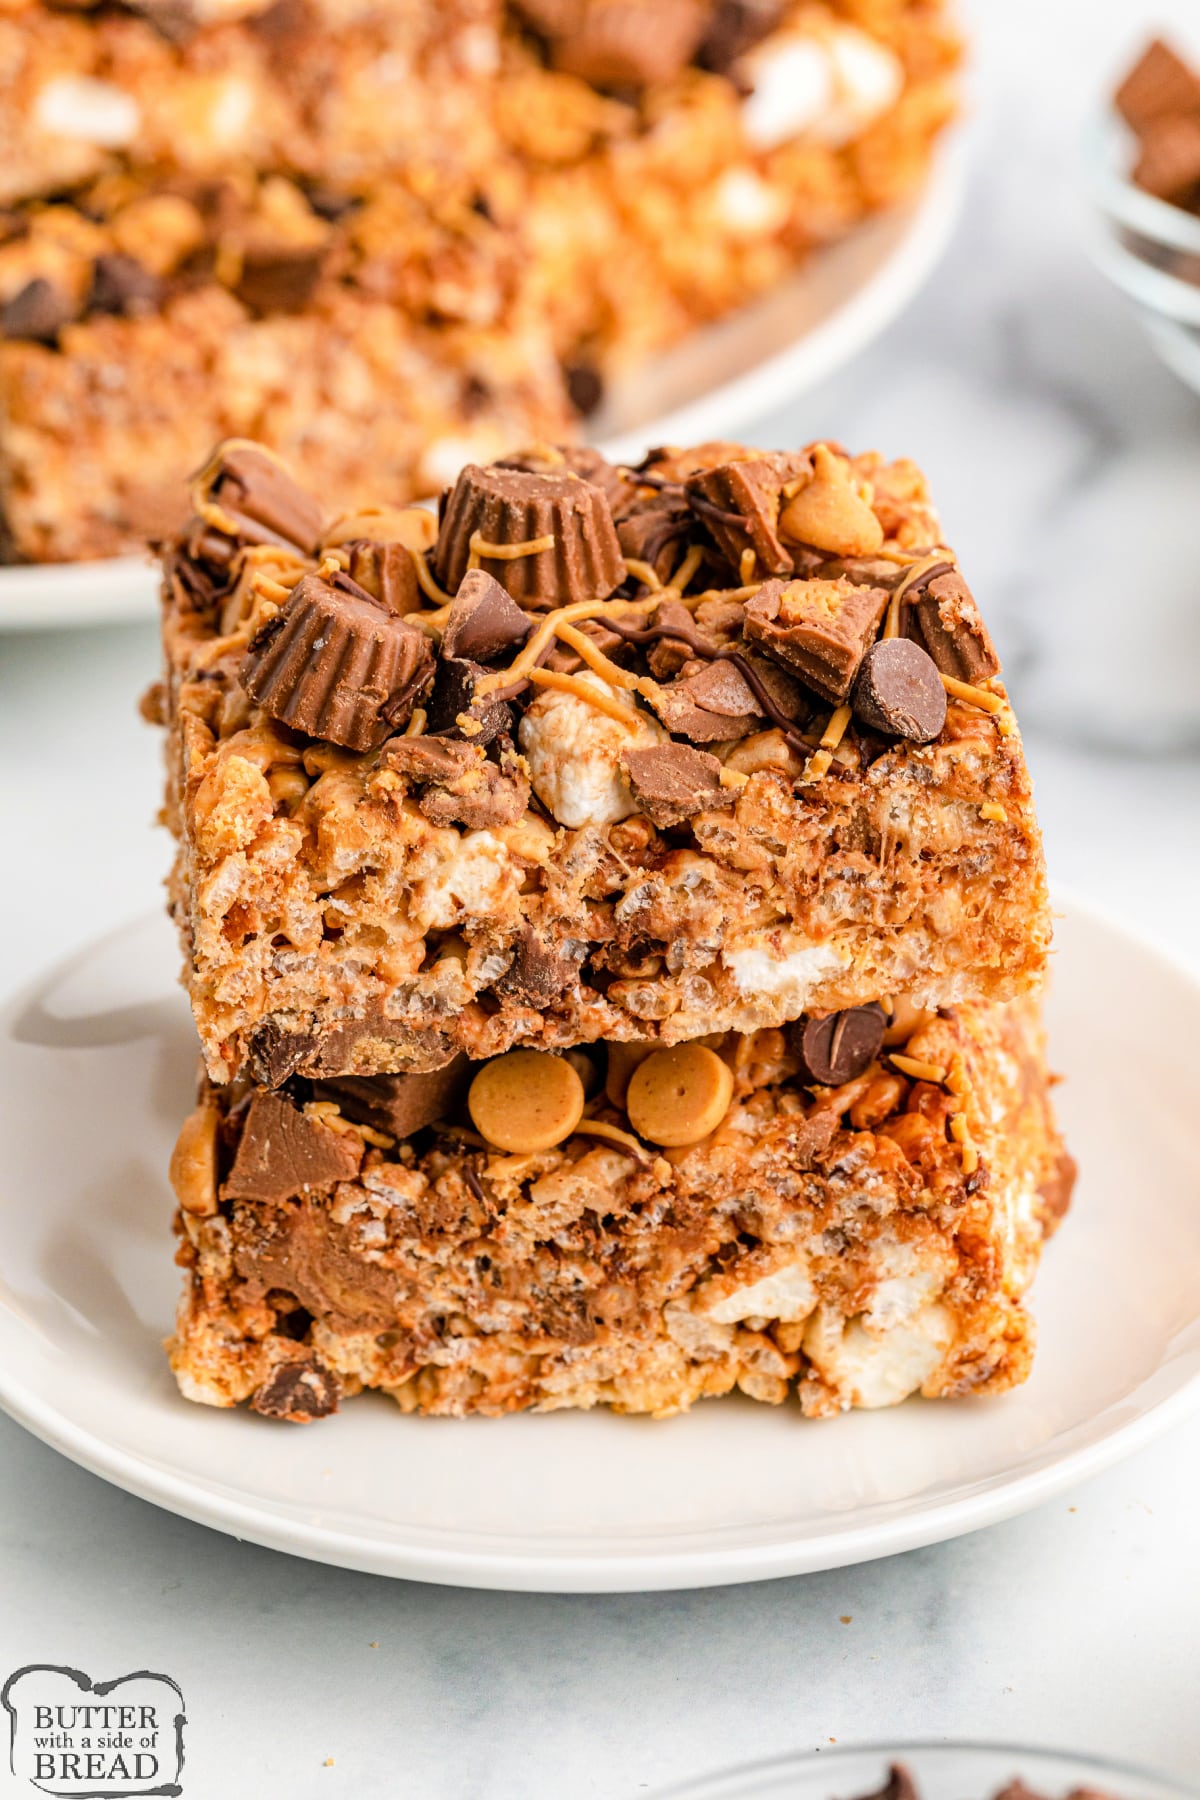 Reese's Rice Krispie Treats are loaded with mini Reese’s peanut butter cups, peanut butter chips, and semisweet chocolate chips. Simple rice krispie treat recipe packed with chocolate and peanut butter!